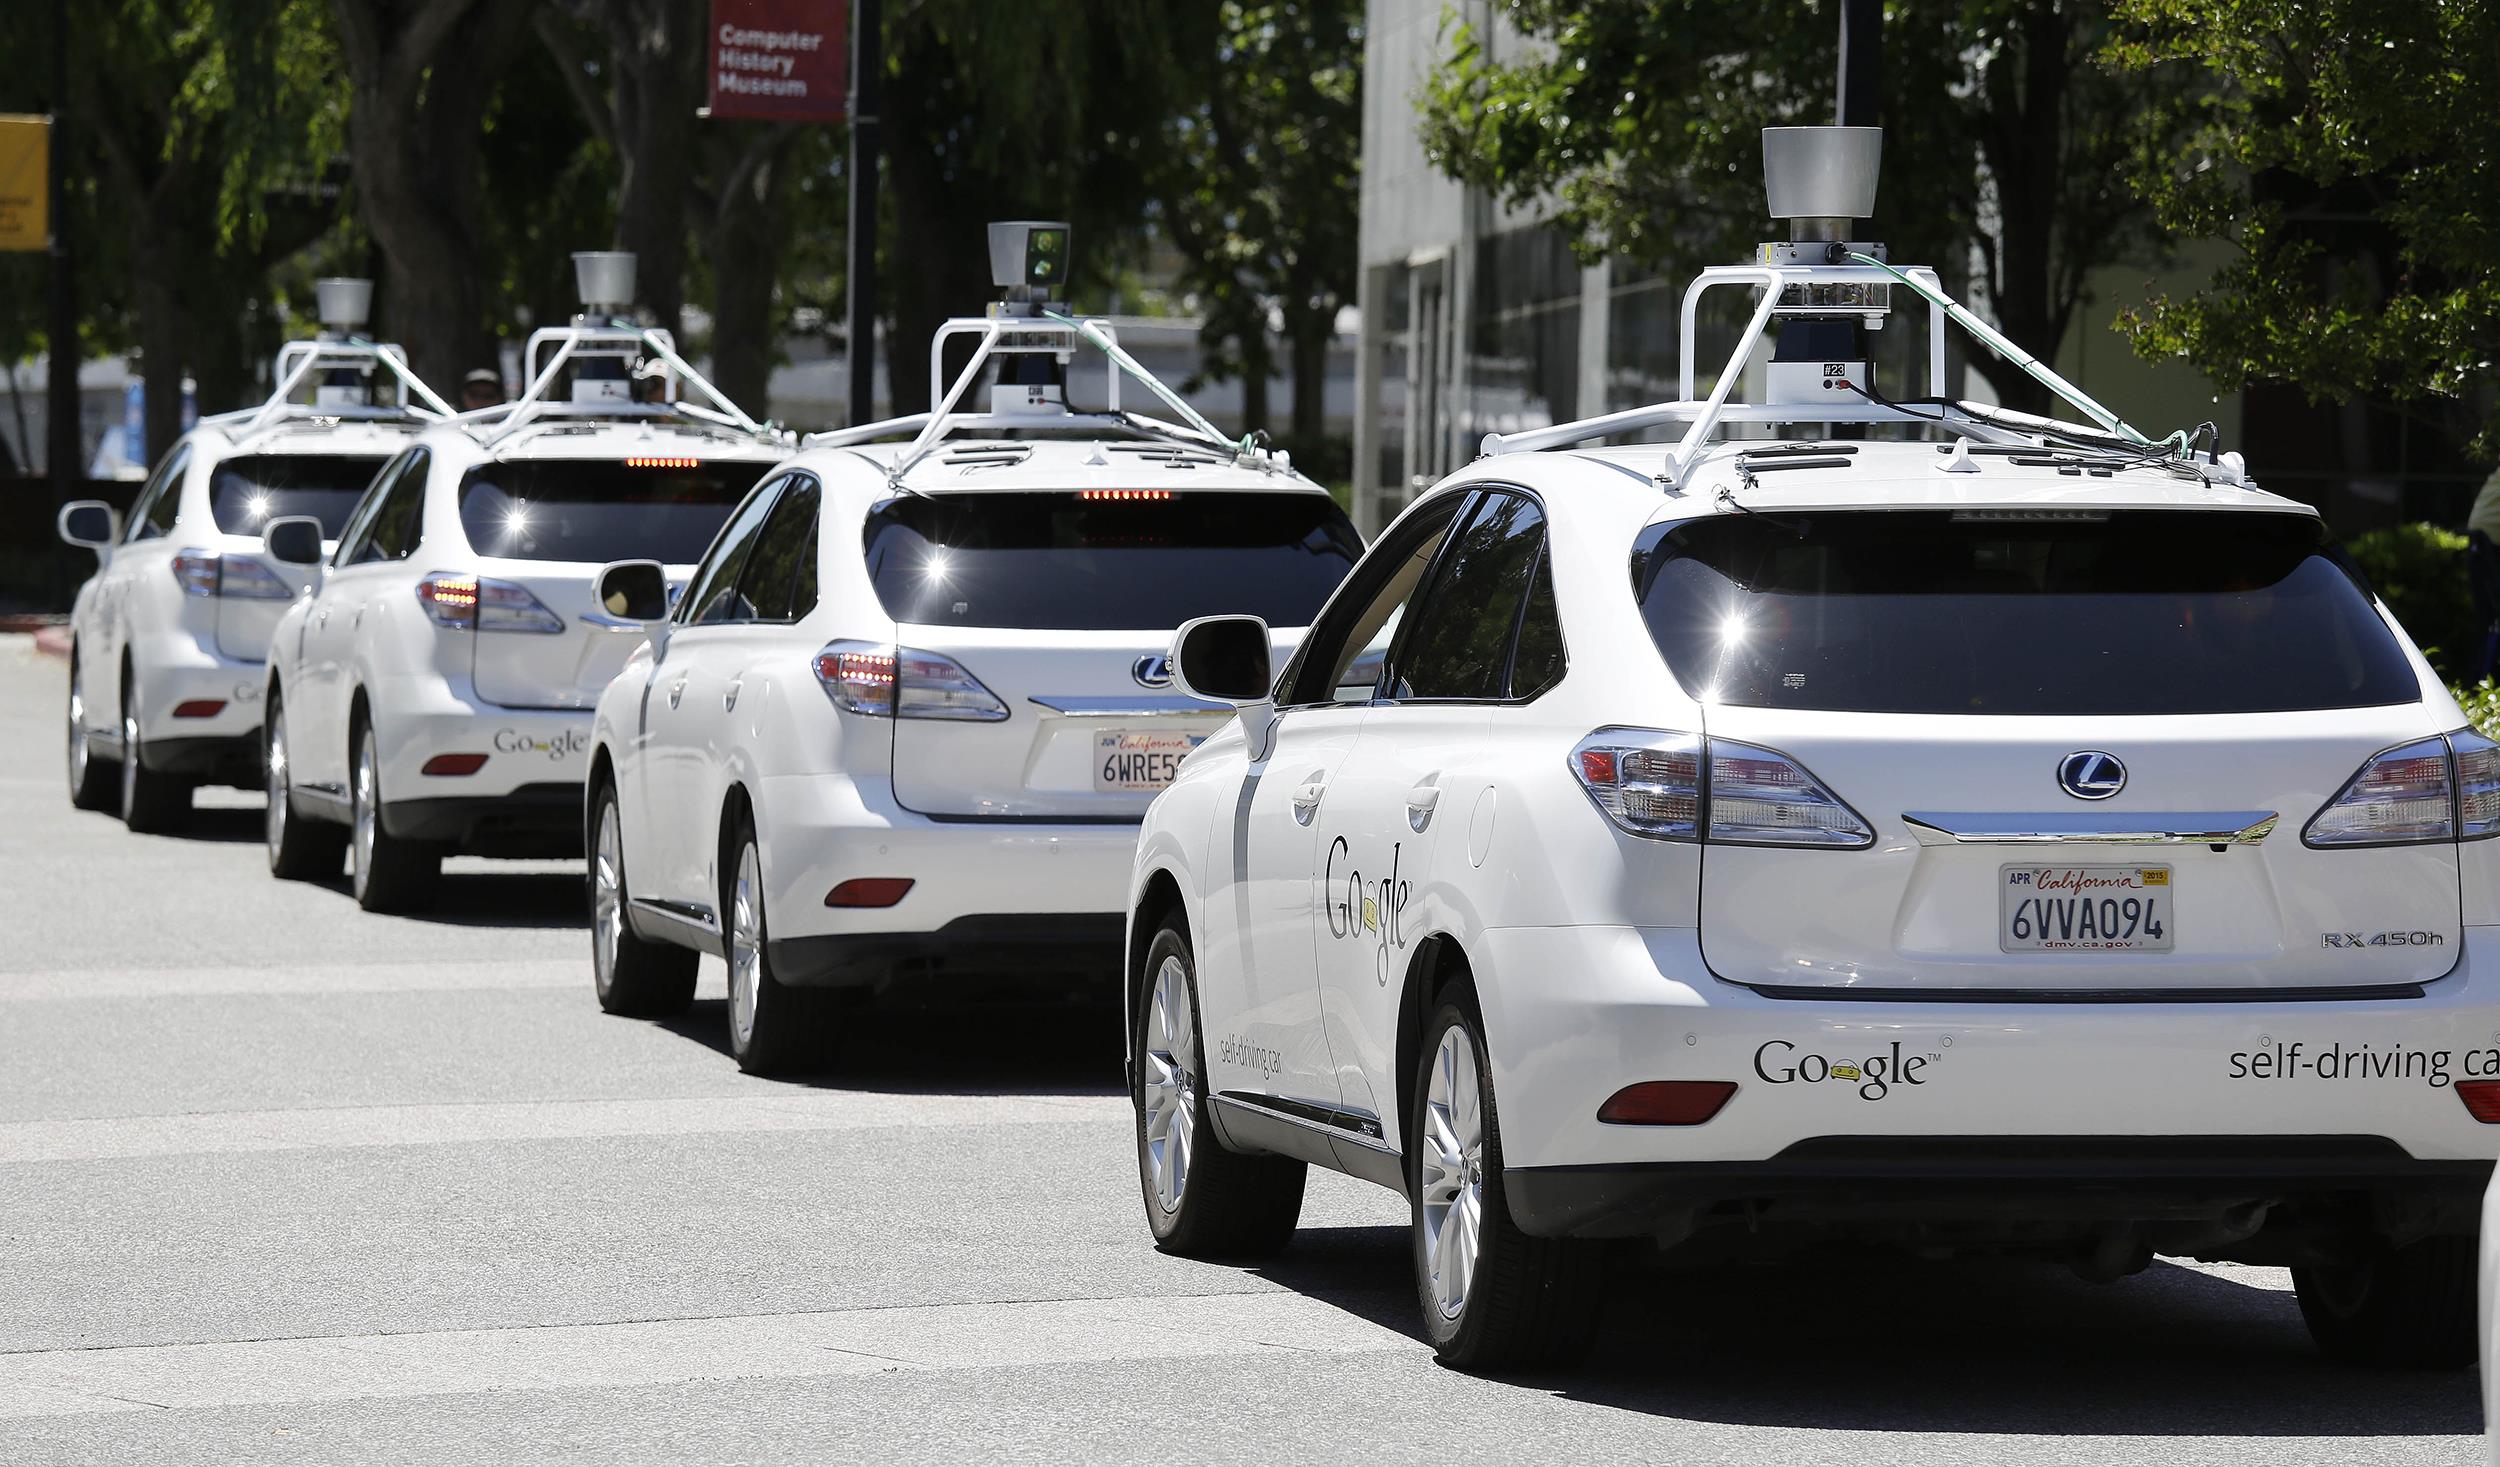 The obstacles self-driving cars must navigate before being allowed on the roads